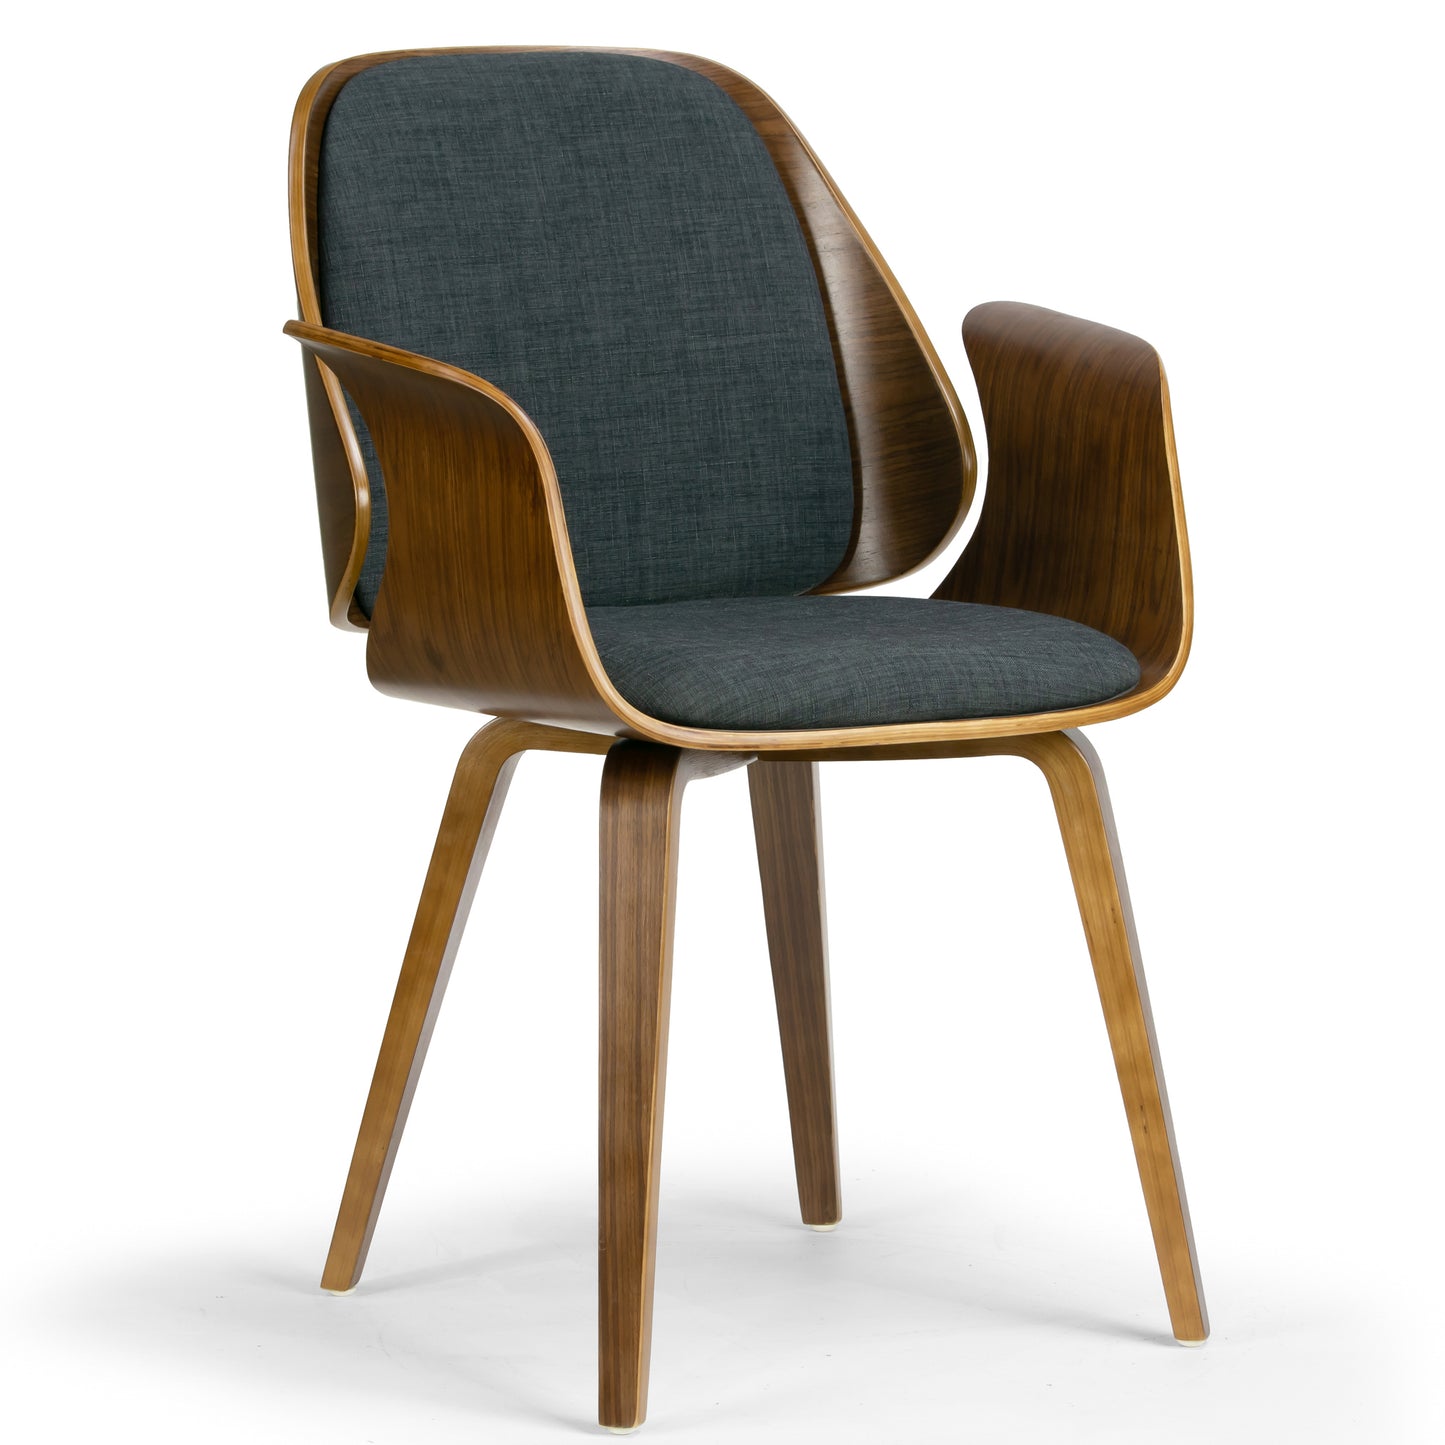 Amaya Walnut Finish Bentwood Dining Chair with Charcoal Fabric Upholstery